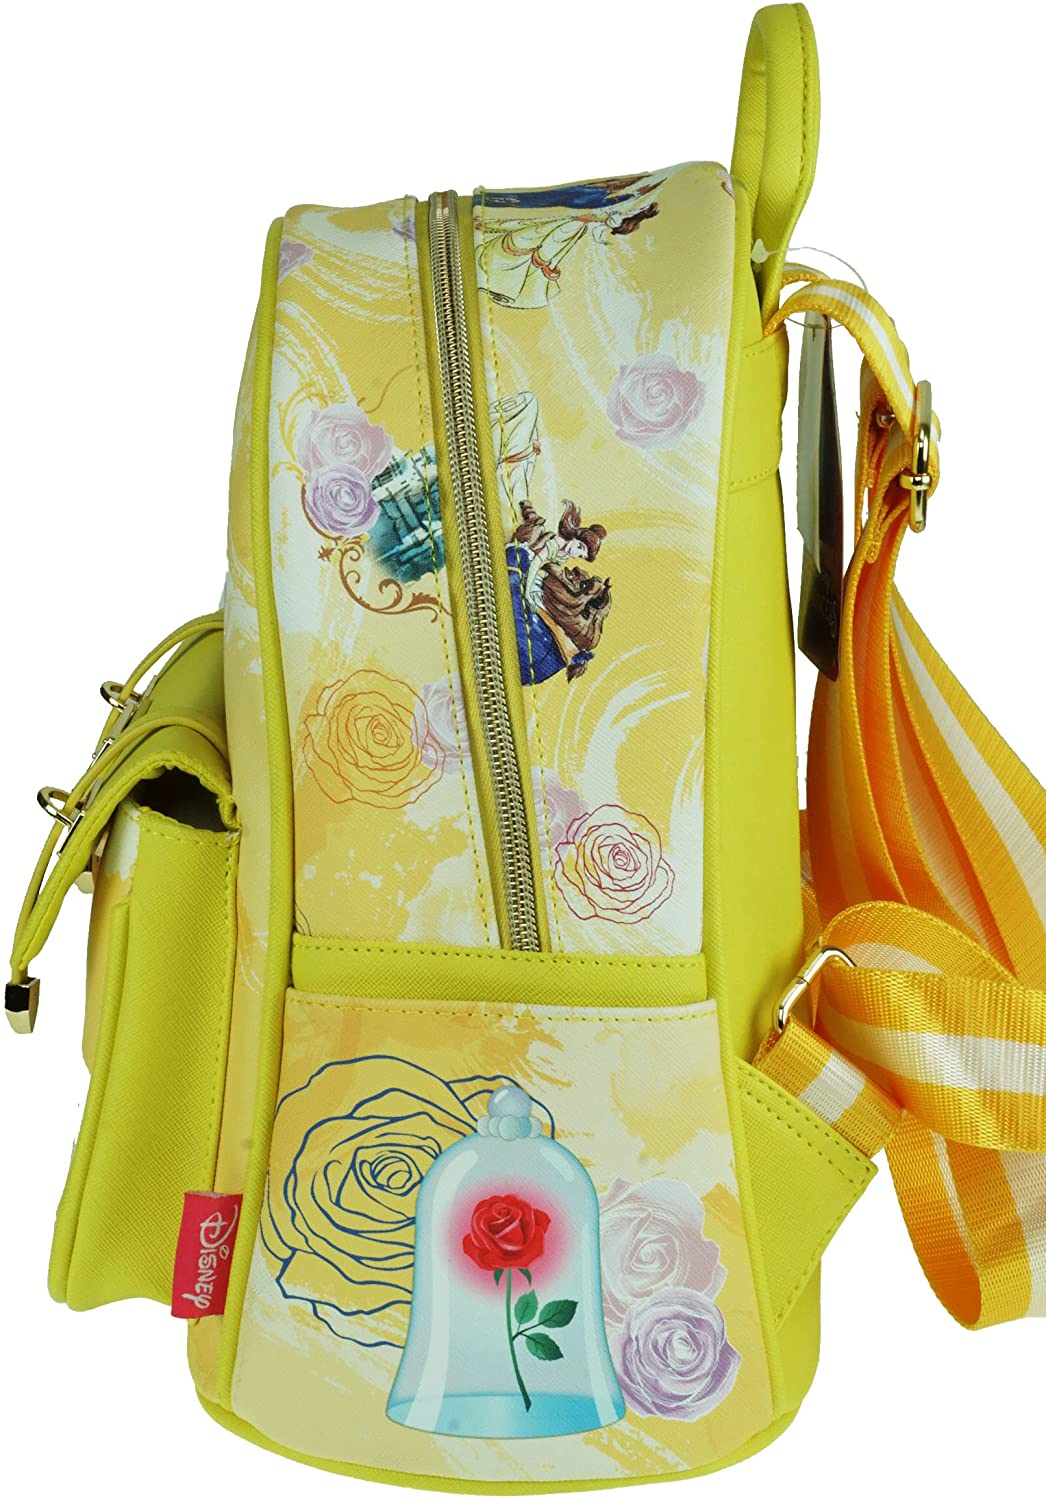 Beauty and the Beast 11" Vegan Leather Mini Backpack - A21951 - GTE Zone